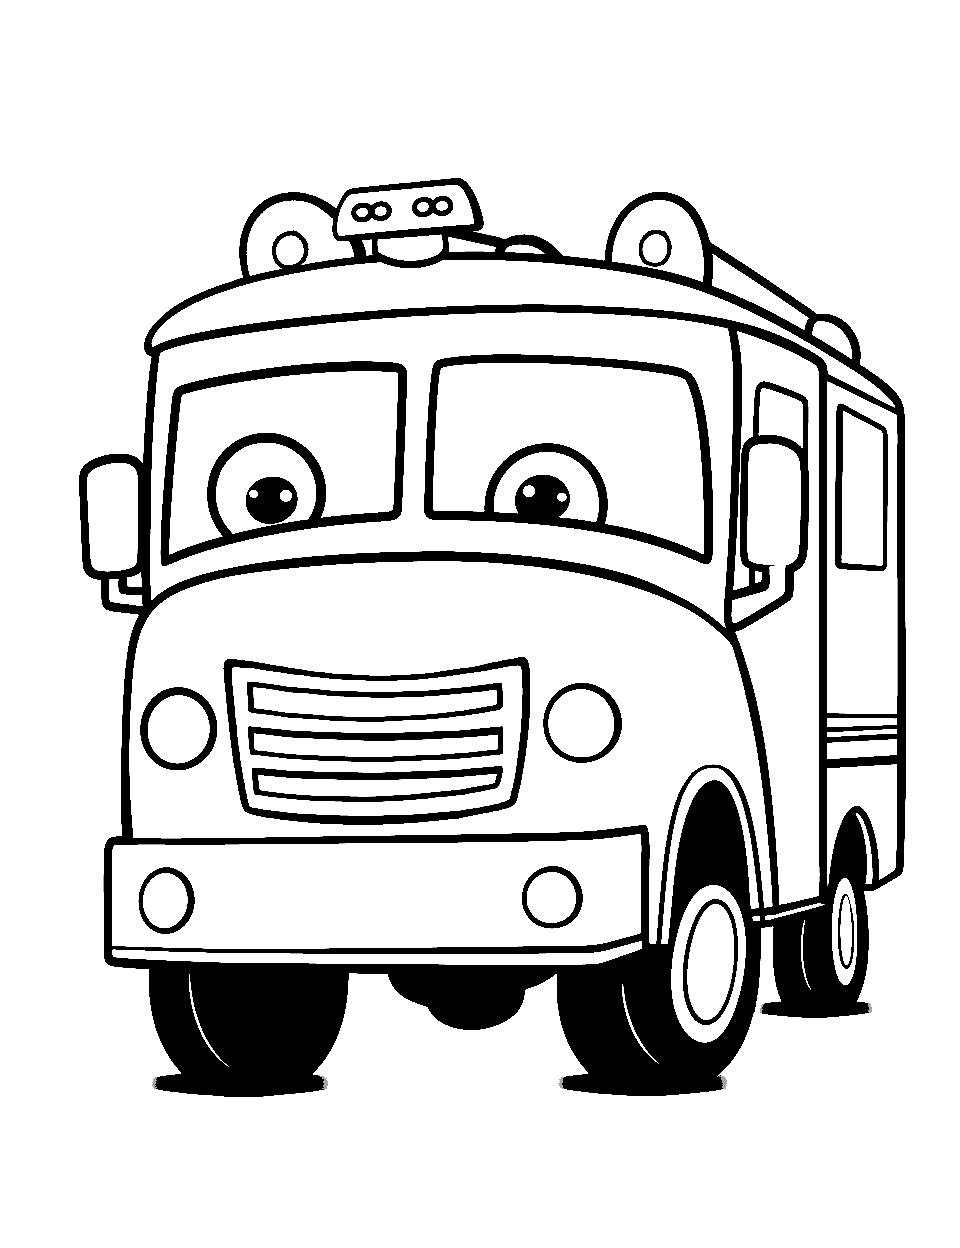 Tayo the Fire Truck Coloring Page - The character Tayo the Little Bus styled as a fire truck.